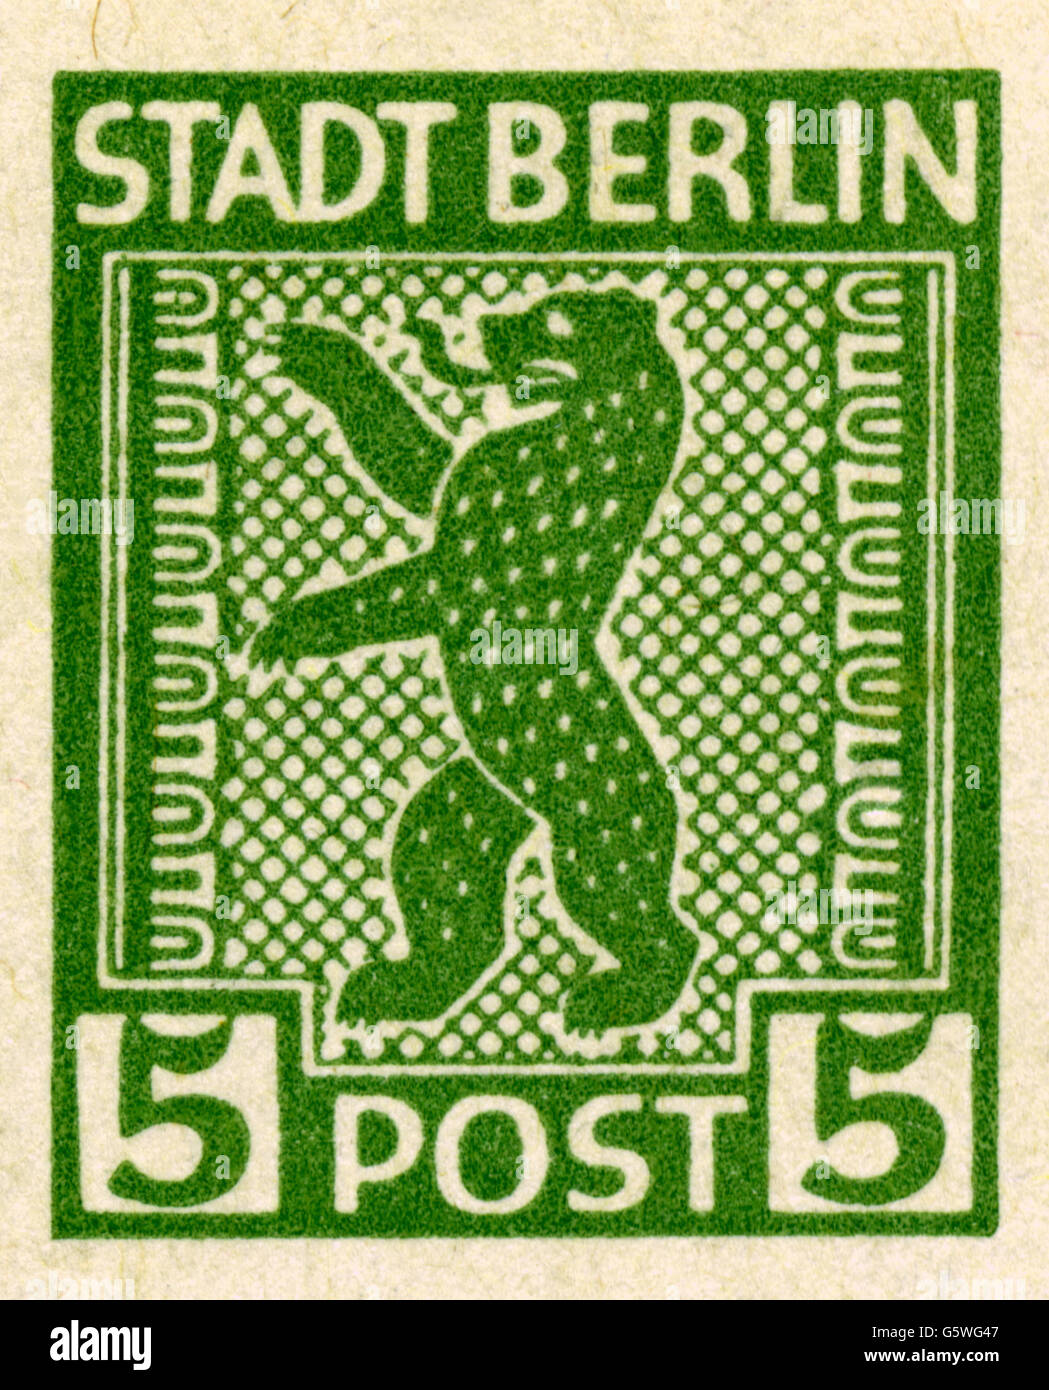 mail, postage stamps, Germany, 5 pfennig postage stamp, city Berlin, 1948, Additional-Rights-Clearences-Not Available Stock Photo